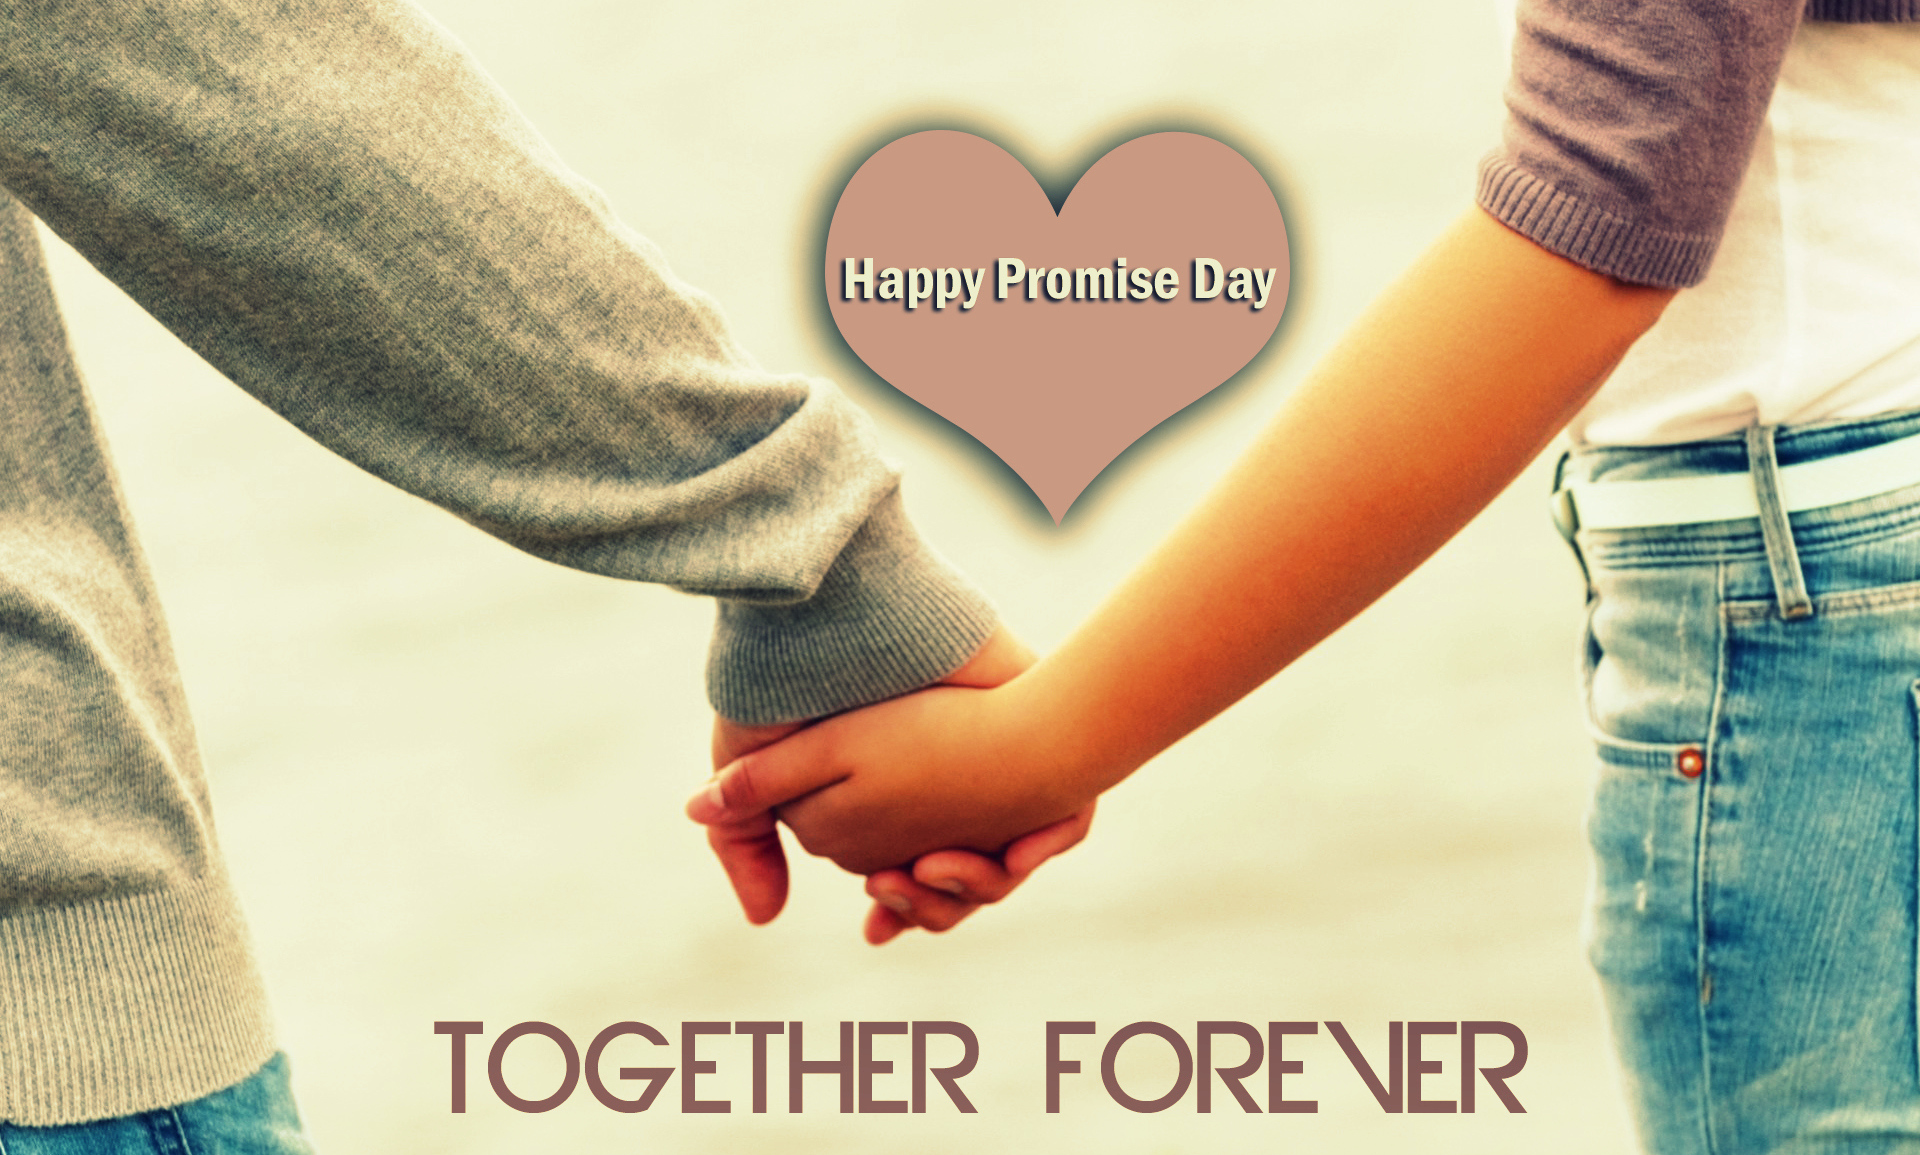 Happy Promise Day Images Pictures Wallpapers (1)